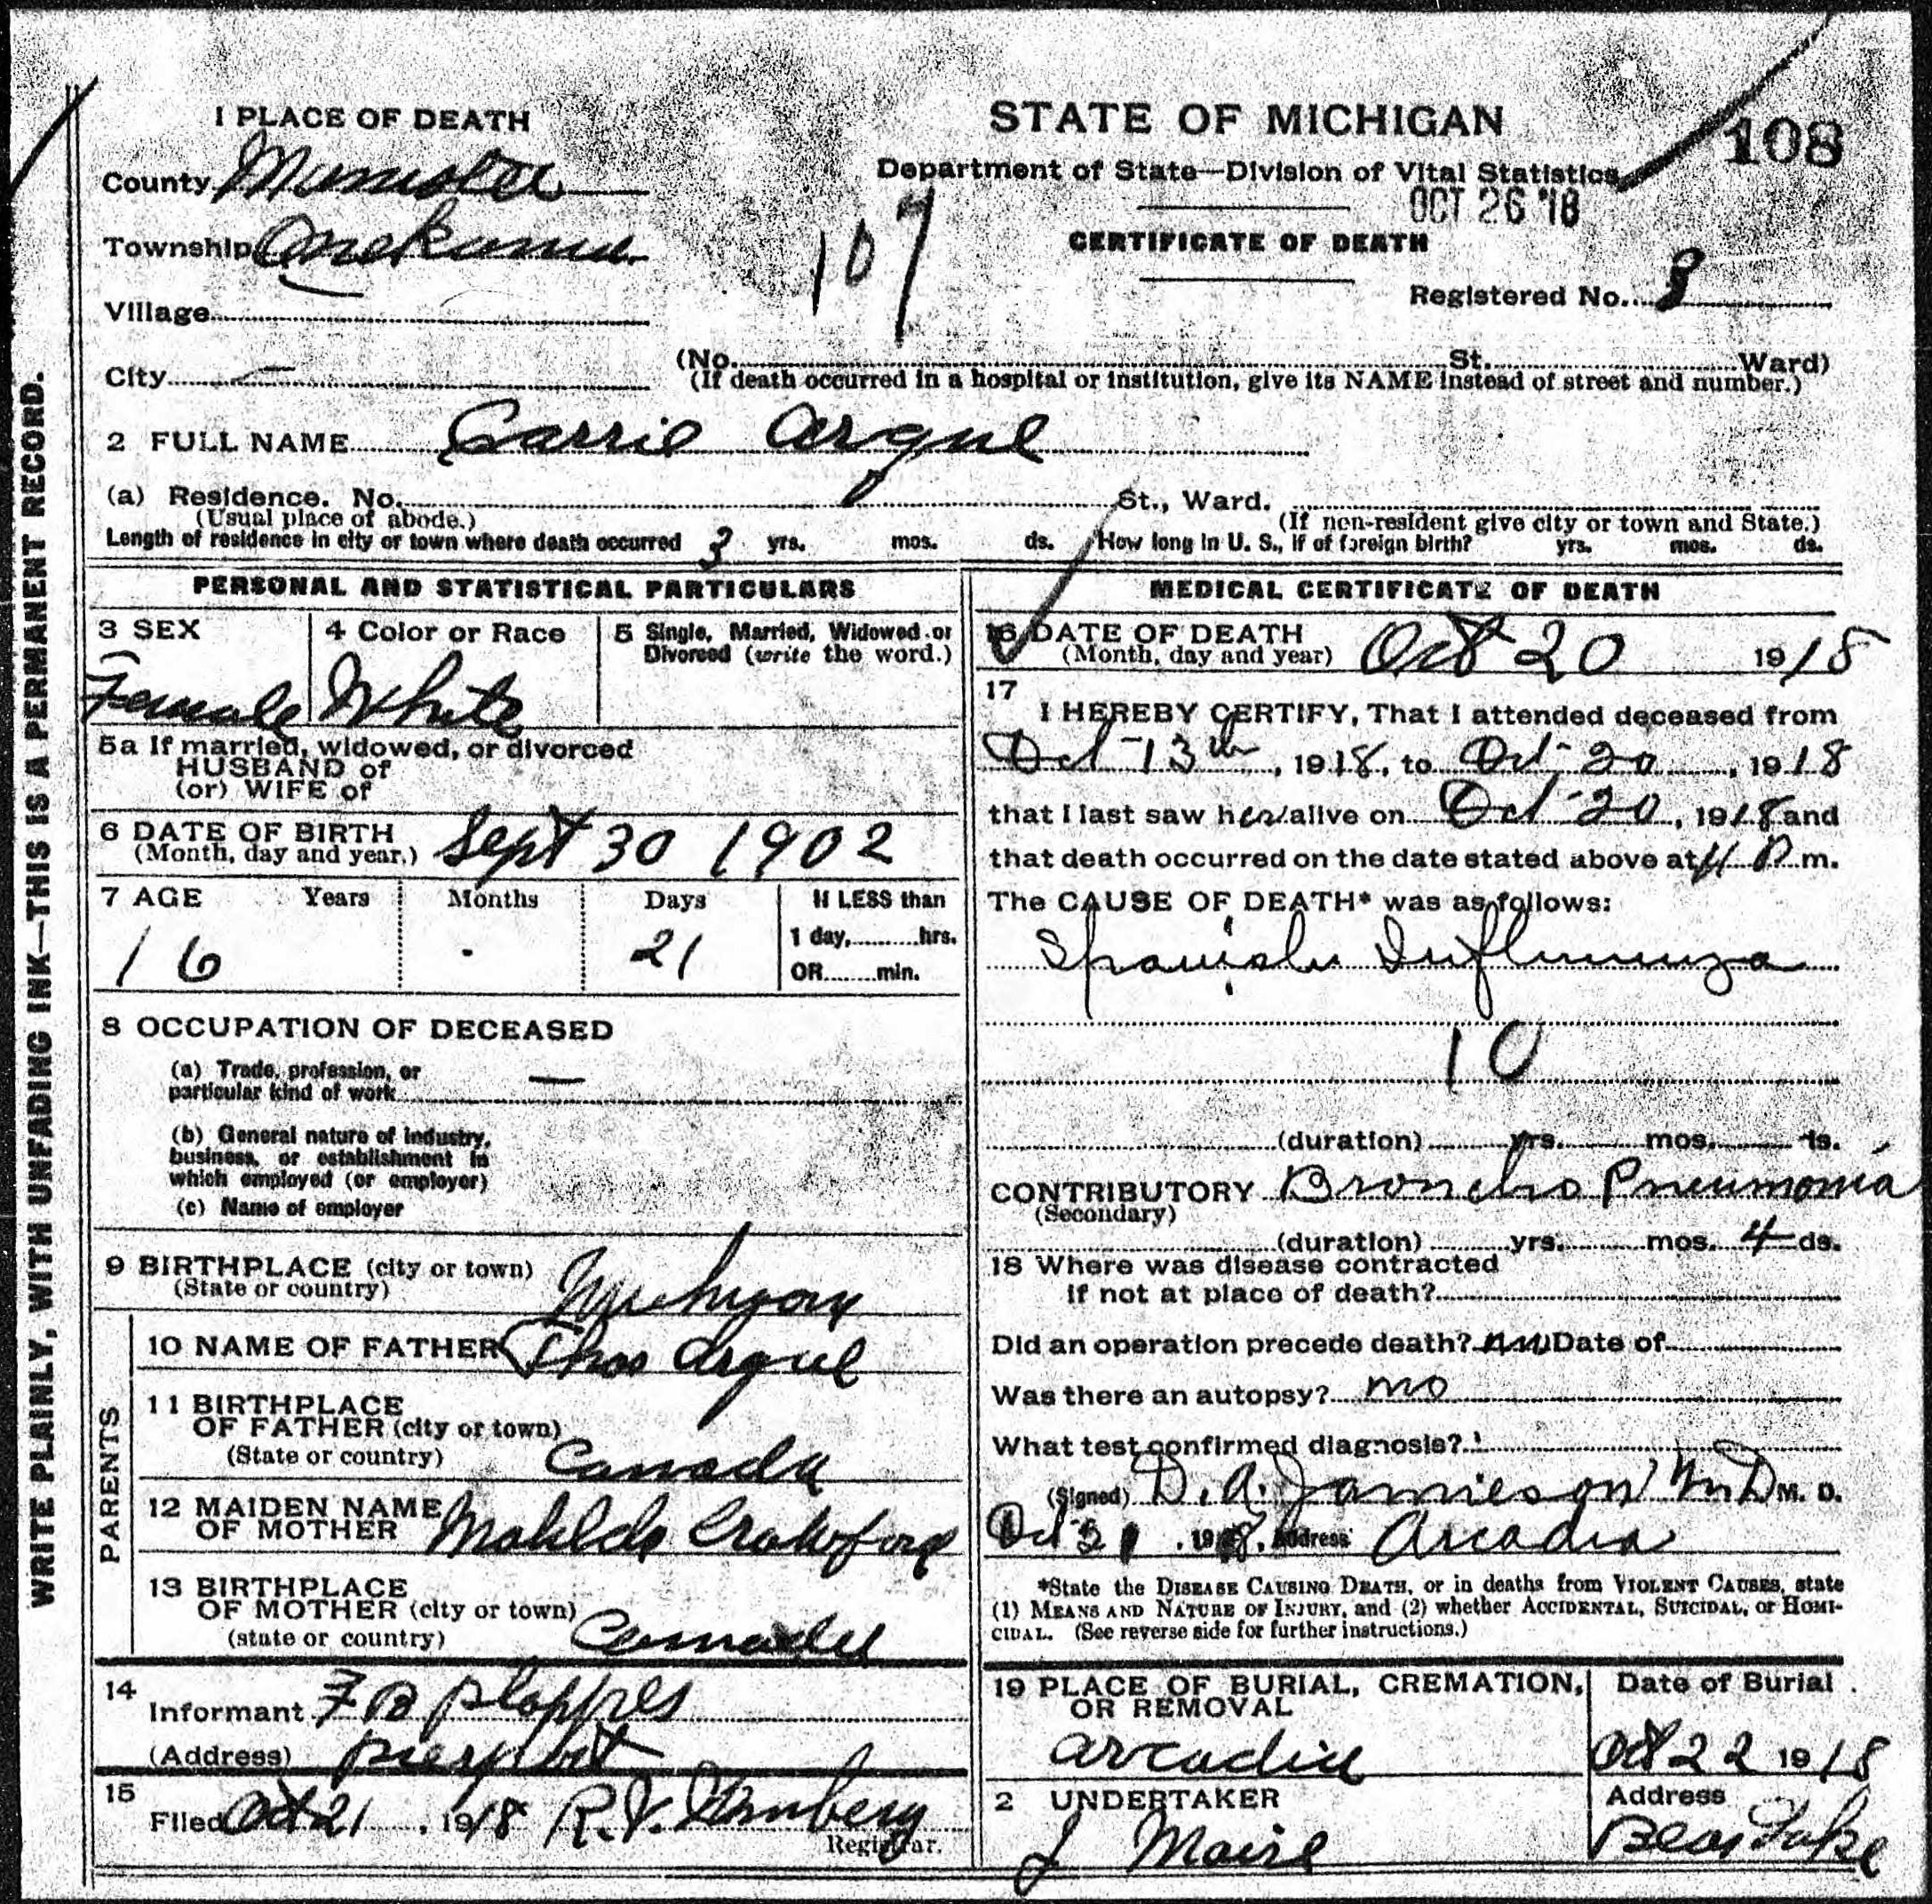 Death Certificate for Carrie Argue